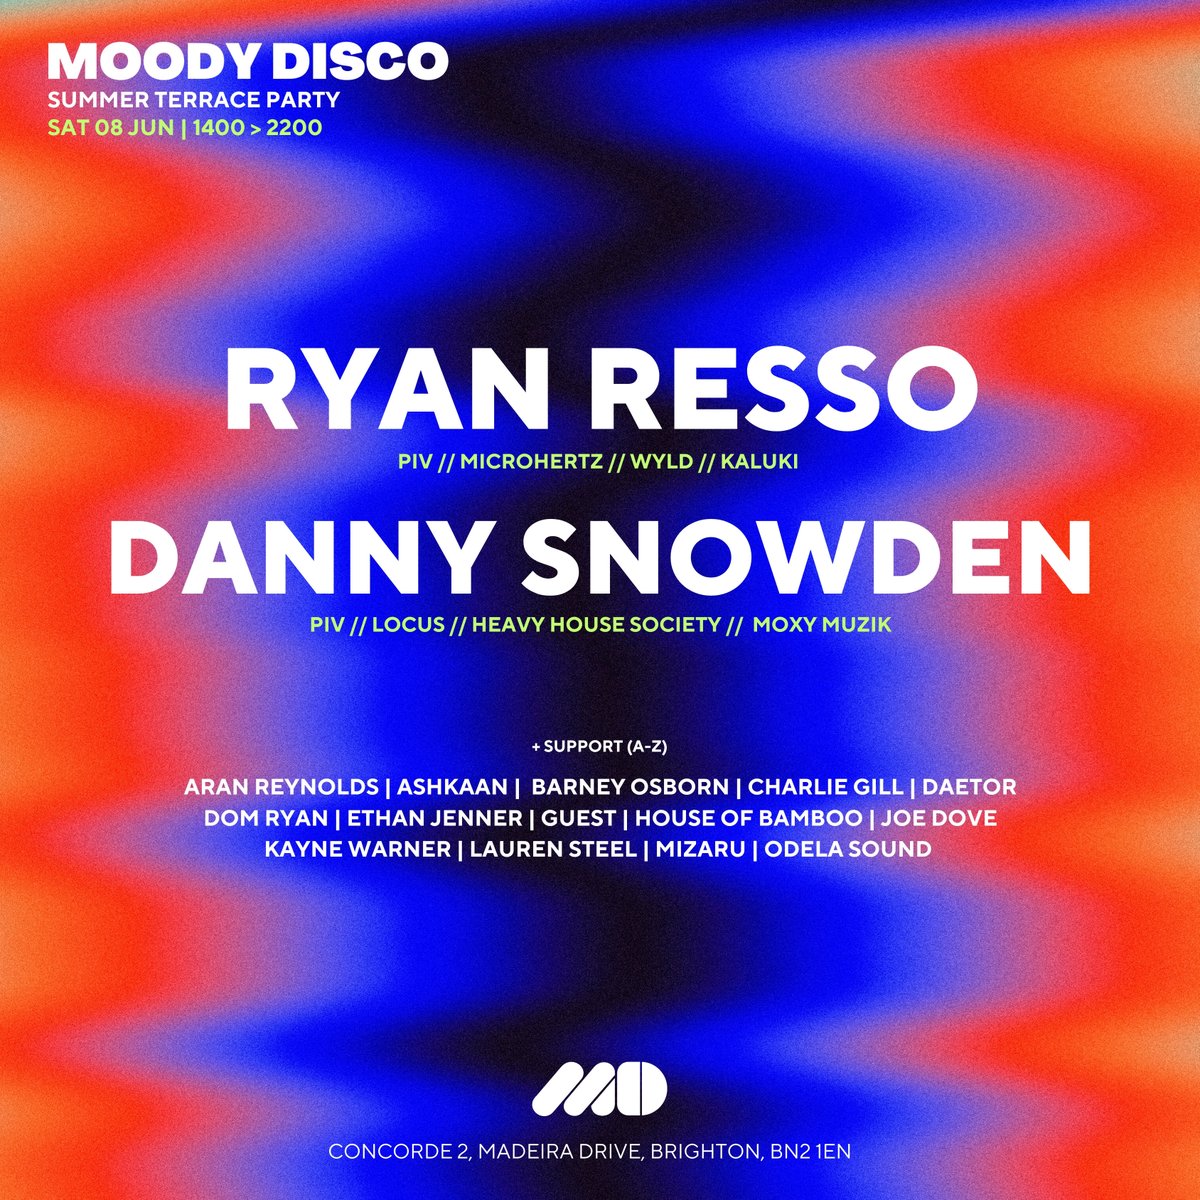 ☀☀ Just Announced ☀☀ Join us in June for a Moody Disco Summer Terrace Party. The team at Moody Disco have just announced a stacked line up for their first summer party here at C2. Head on over to concorde2.co.uk for your FREE ticket!